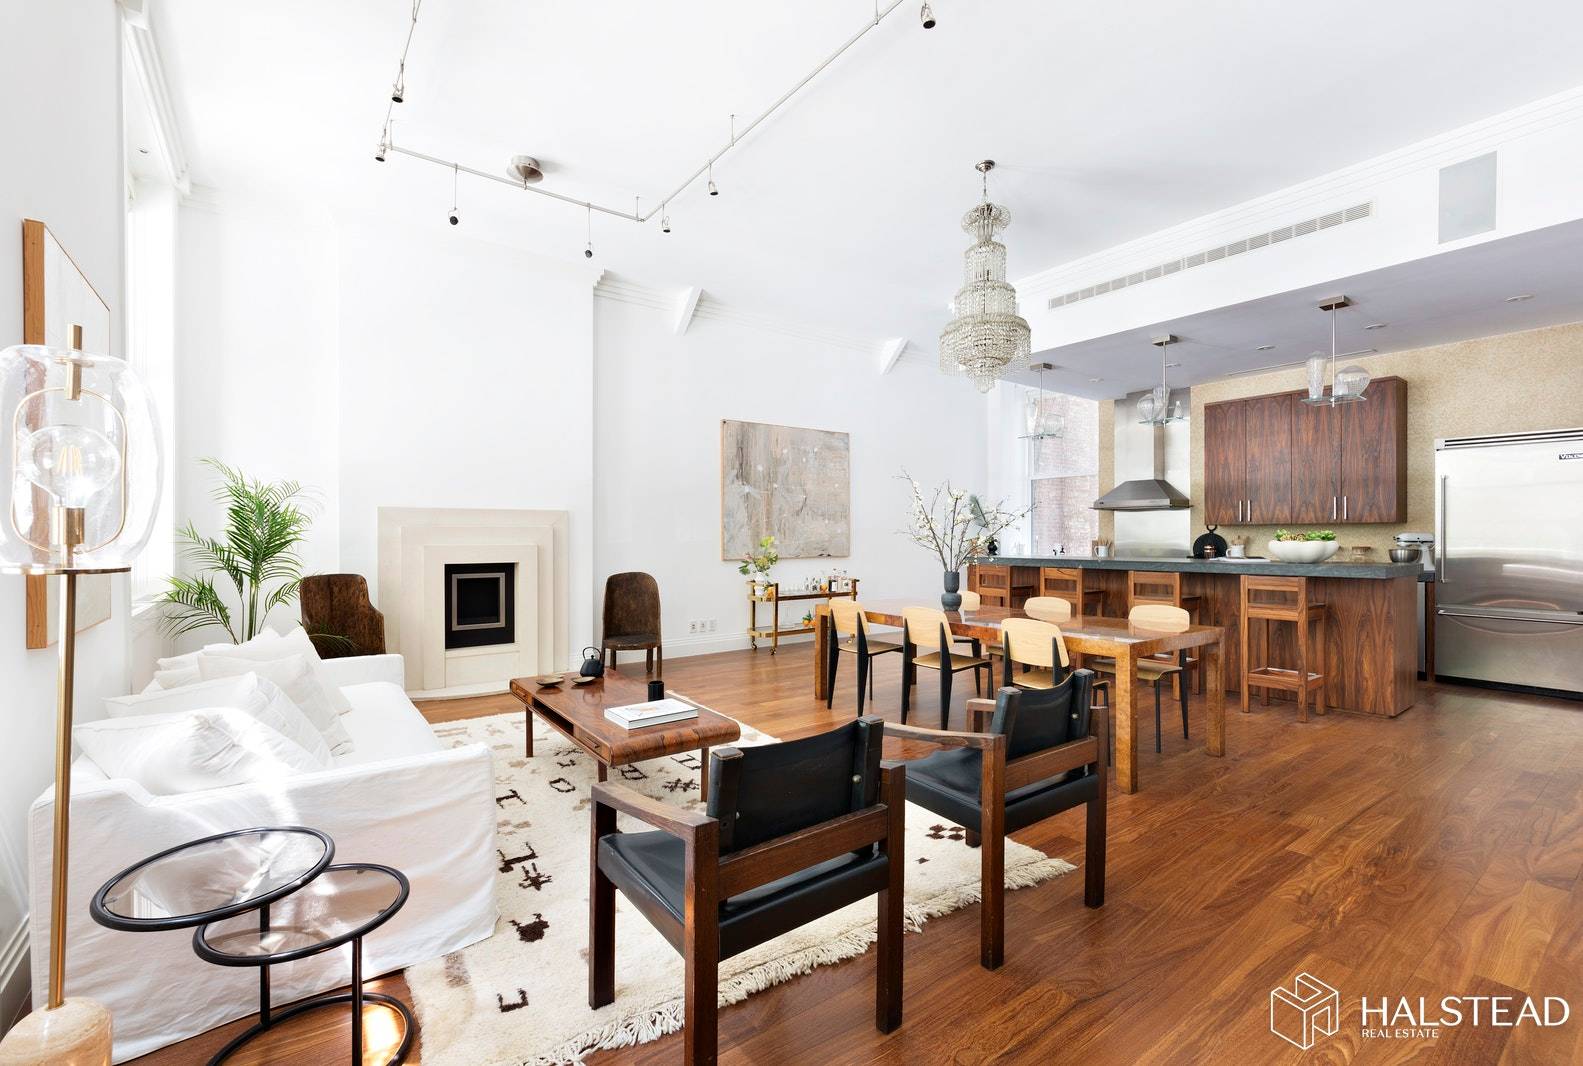 Beautiful lofty 2 bedroom 2 bathroom apartment boasting 1, 500 sq ft of impeccably designed living space, on one of the loveliest tree lined blocks in Greenwich Village's Gold Coast ...